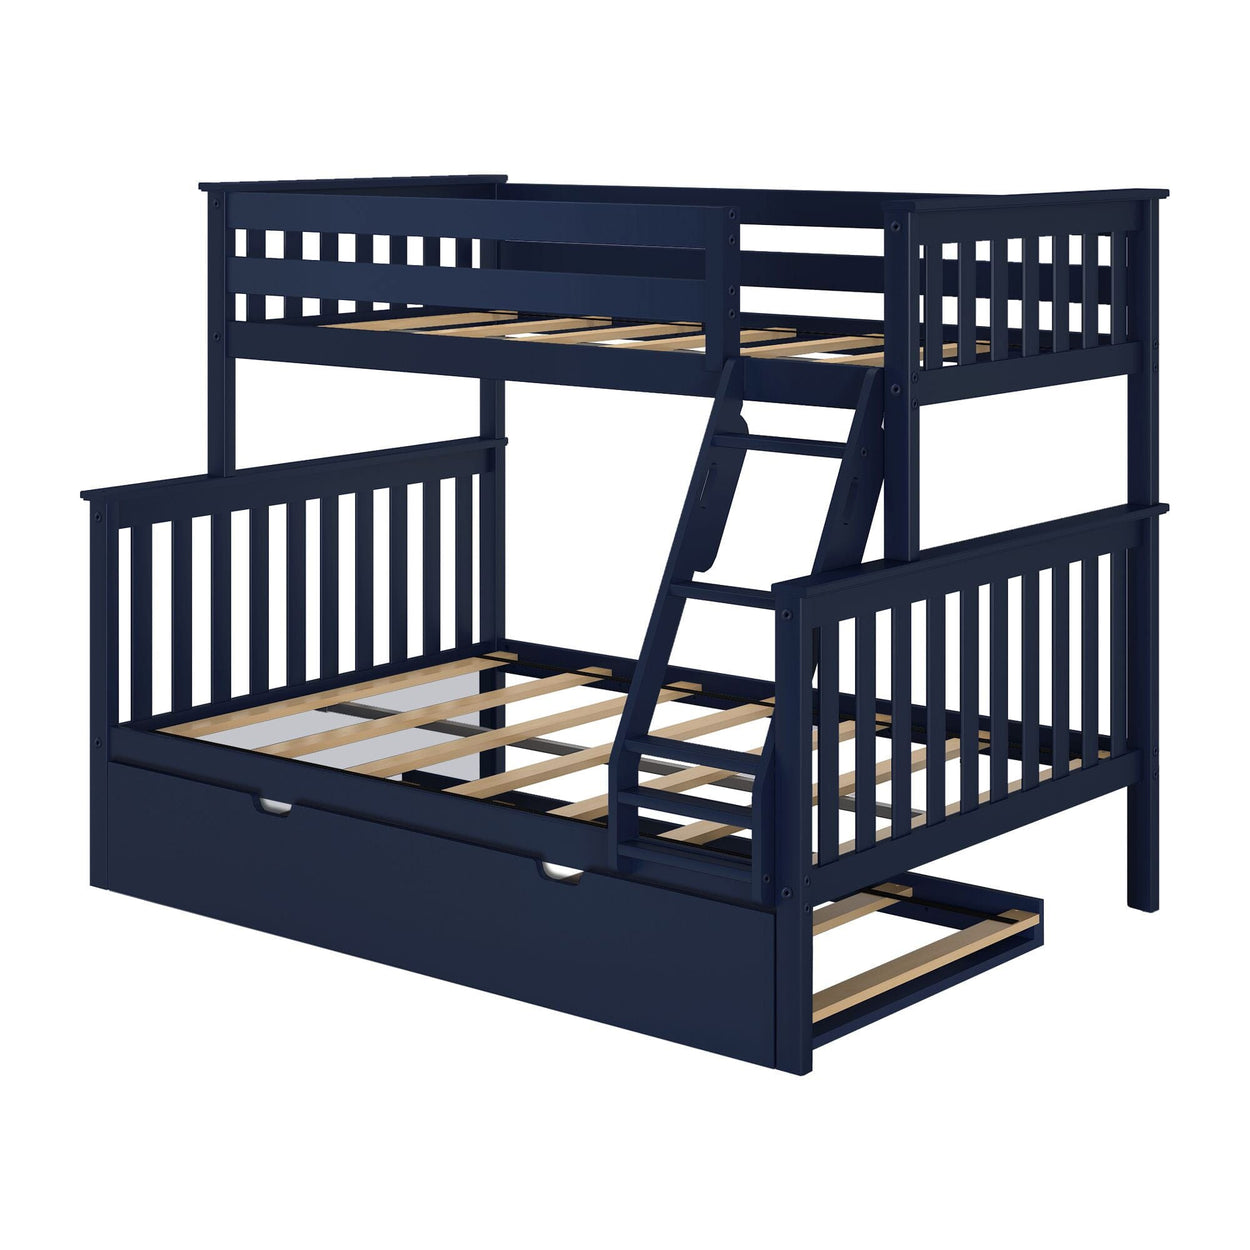 186231-131 : Bunk Beds Classic Twin over Full Bunk Bed with Trundle, Blue